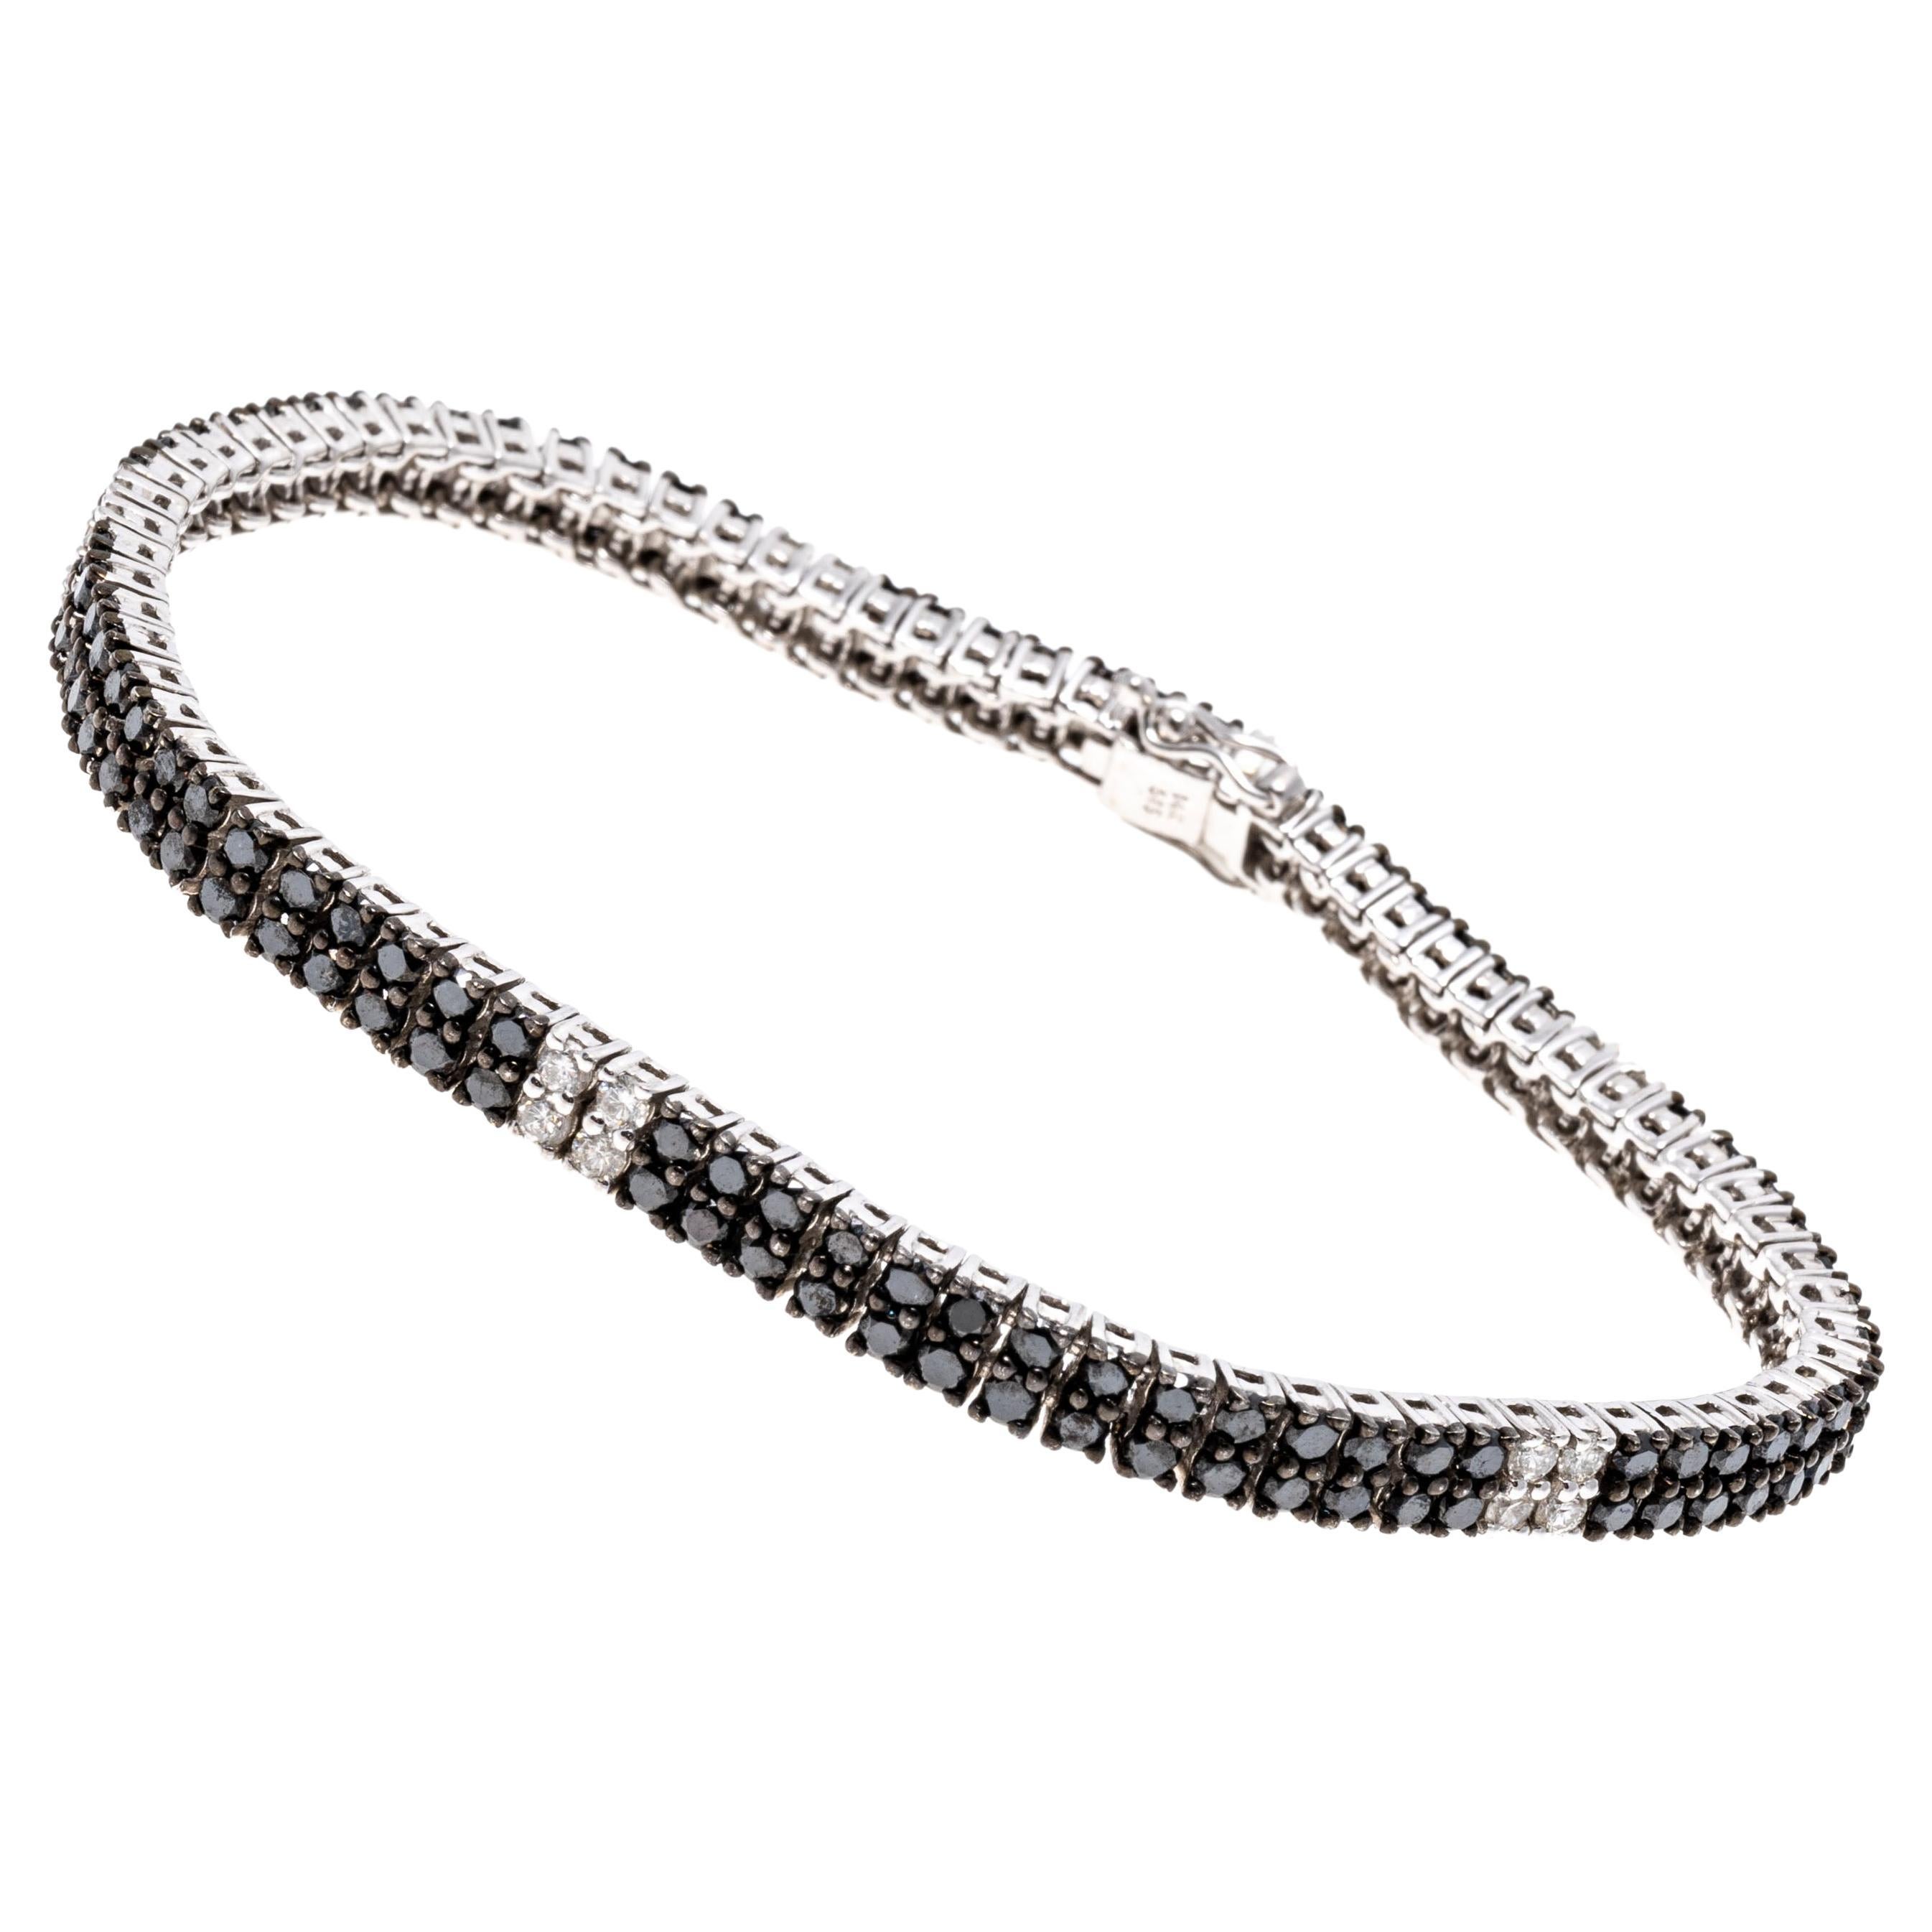 14k white gold bracelet. This amazing bracelet is a two row line style, featuring a field of round faceted black diamonds, punctuated with five stations of white faceted diamonds. The total diamond weight for the bracelet is 5.71 TCW, all of the